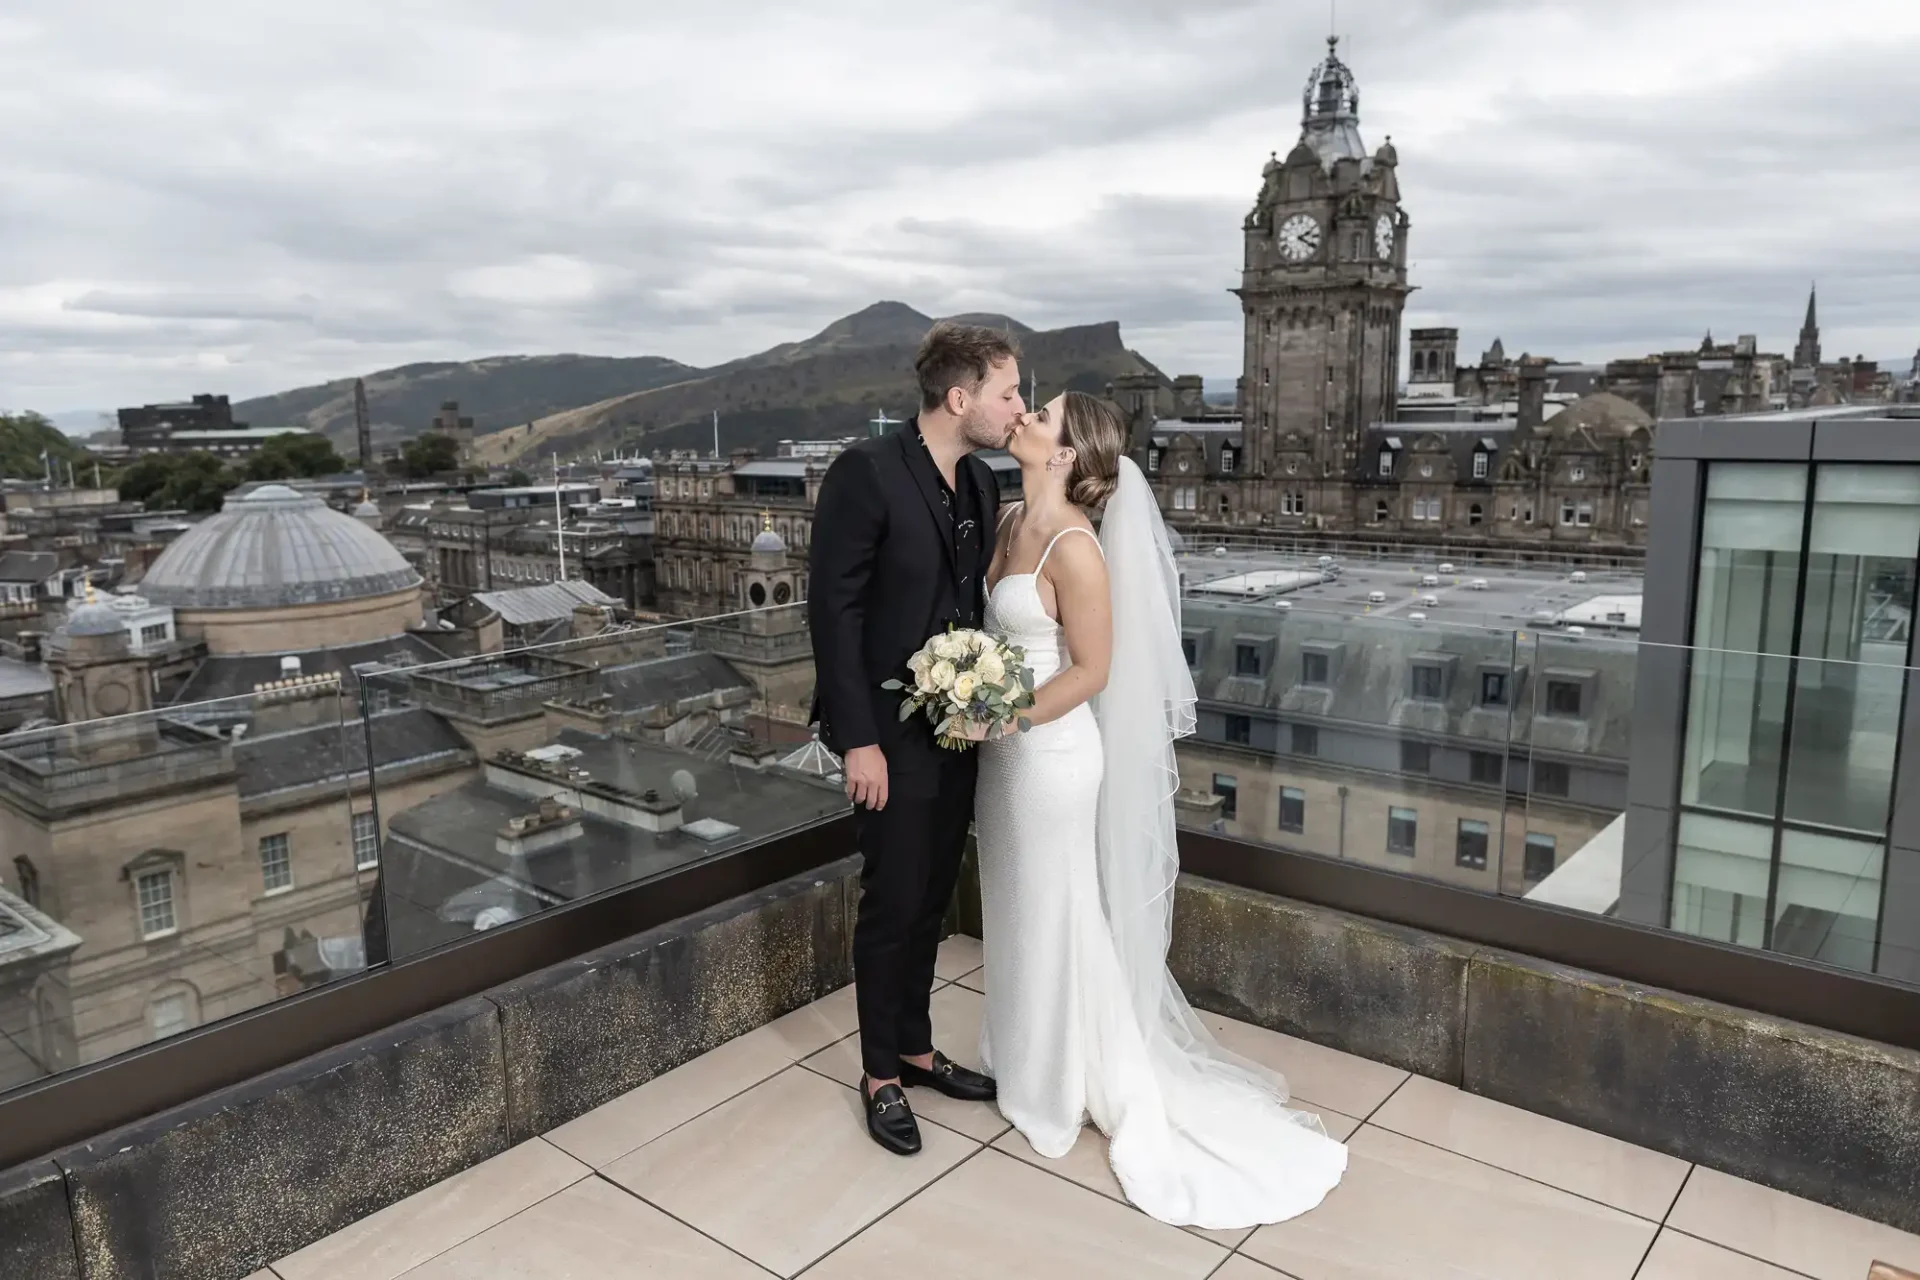 A bride and groom kissing on a rooftop, with edinburgh's cityscape and hills in the background.